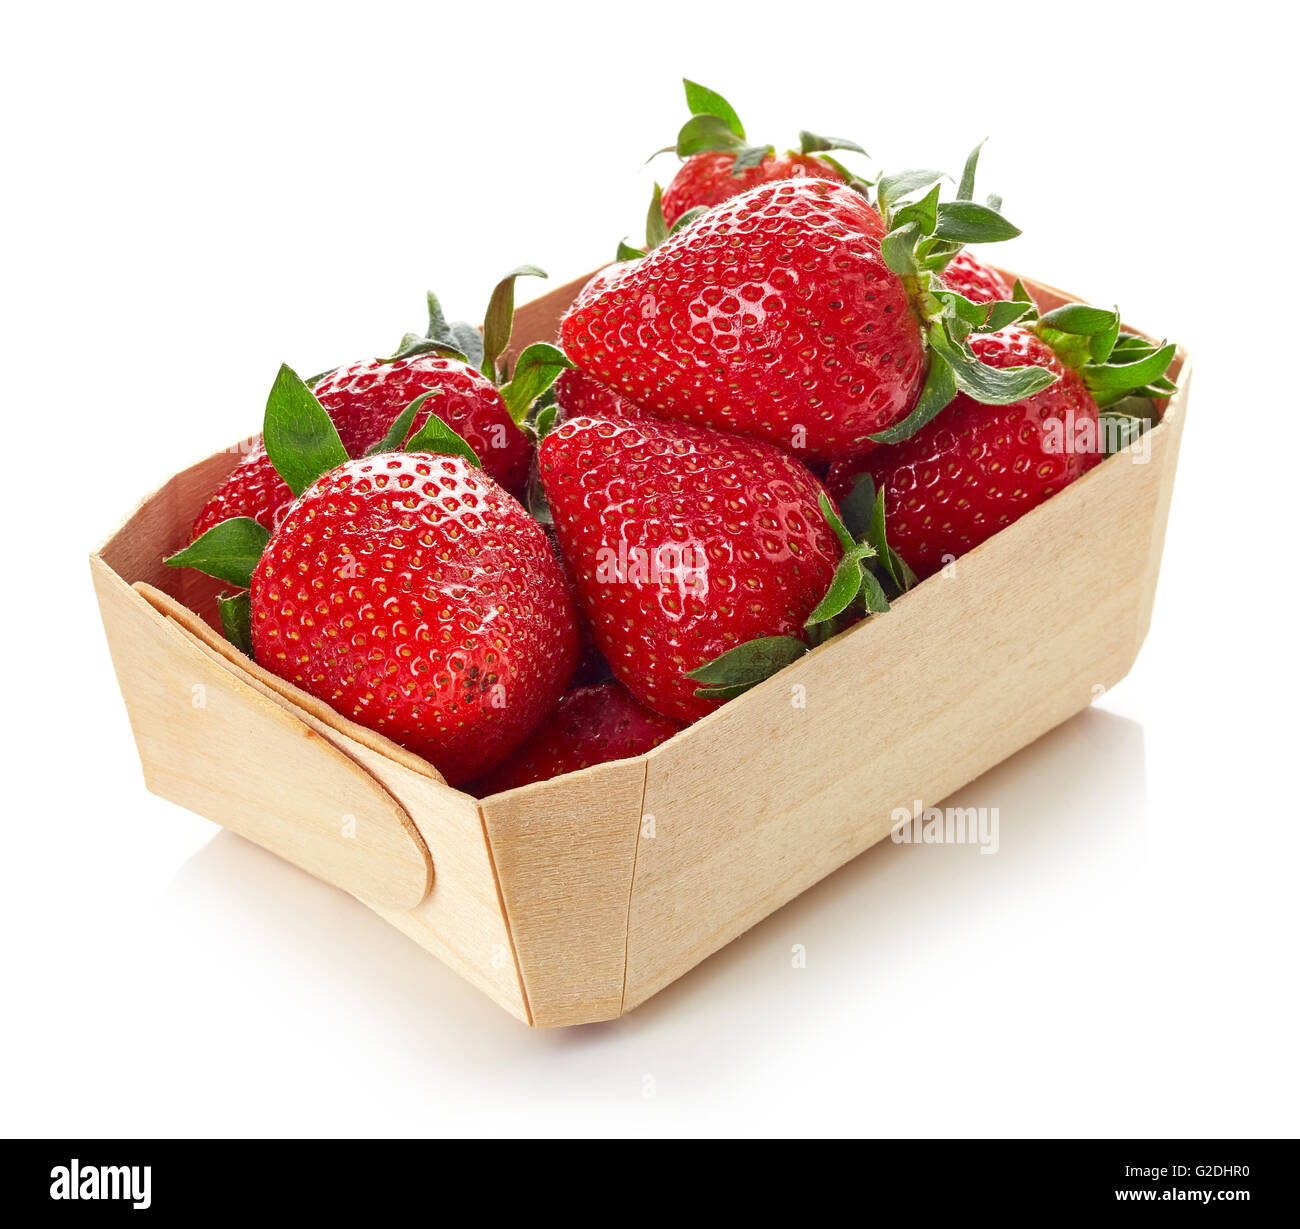 strawberry in wooden container box, isolated on white background Stock Photo